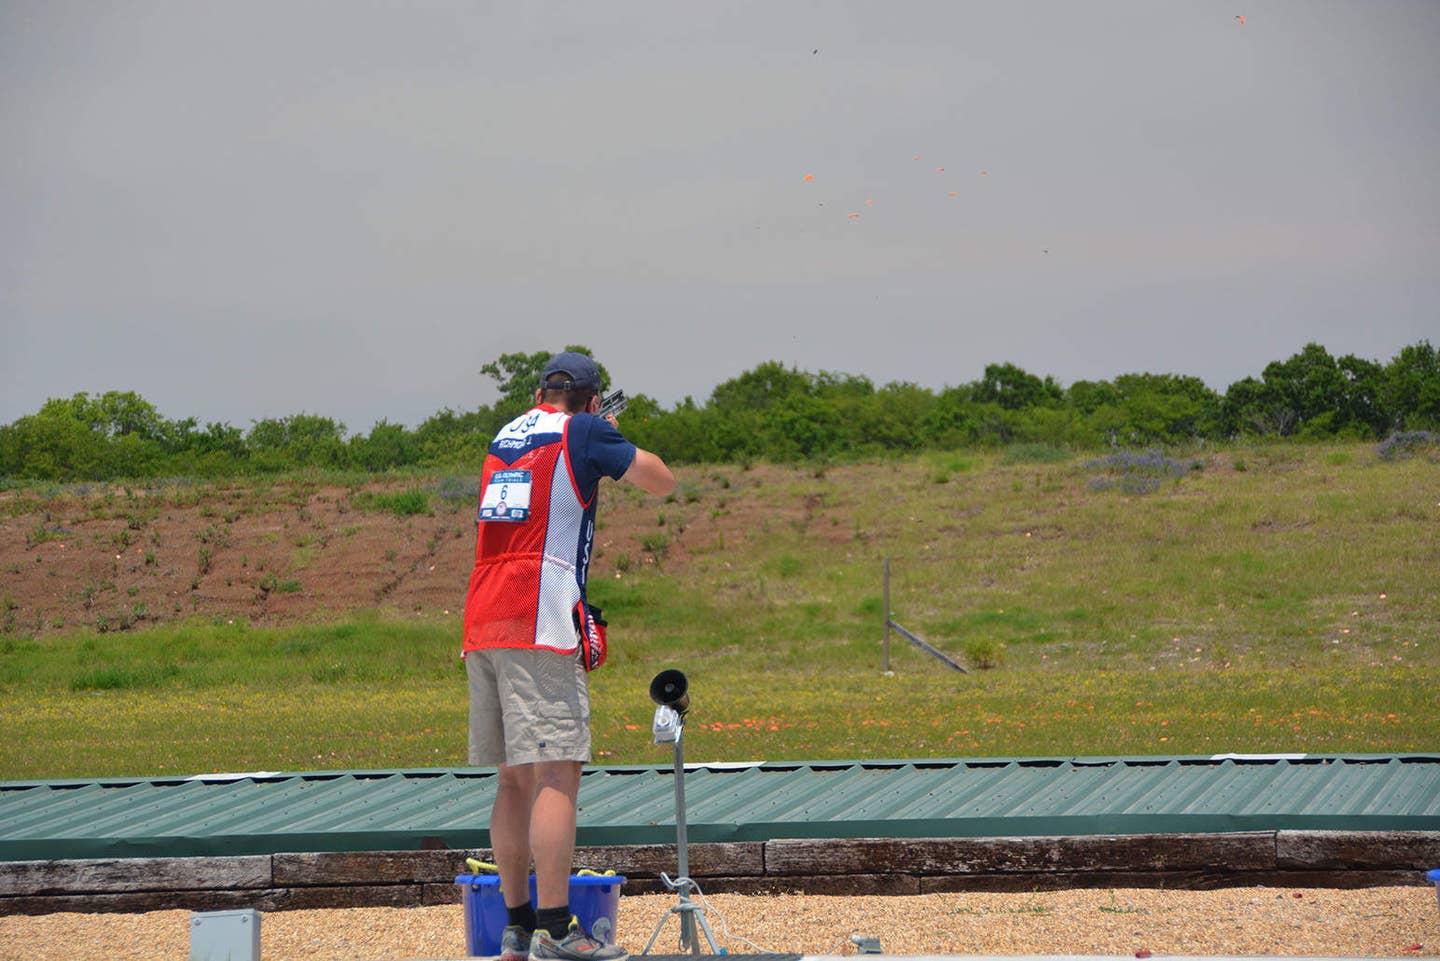 Sgt. 1st Class Josh Richmond competes in the Double Trap event in preparation for the 2016 Olympics. Richmond went on to place seventh in Rio. (Photo: US Army Marksmanship Unit Brenda Rolin)